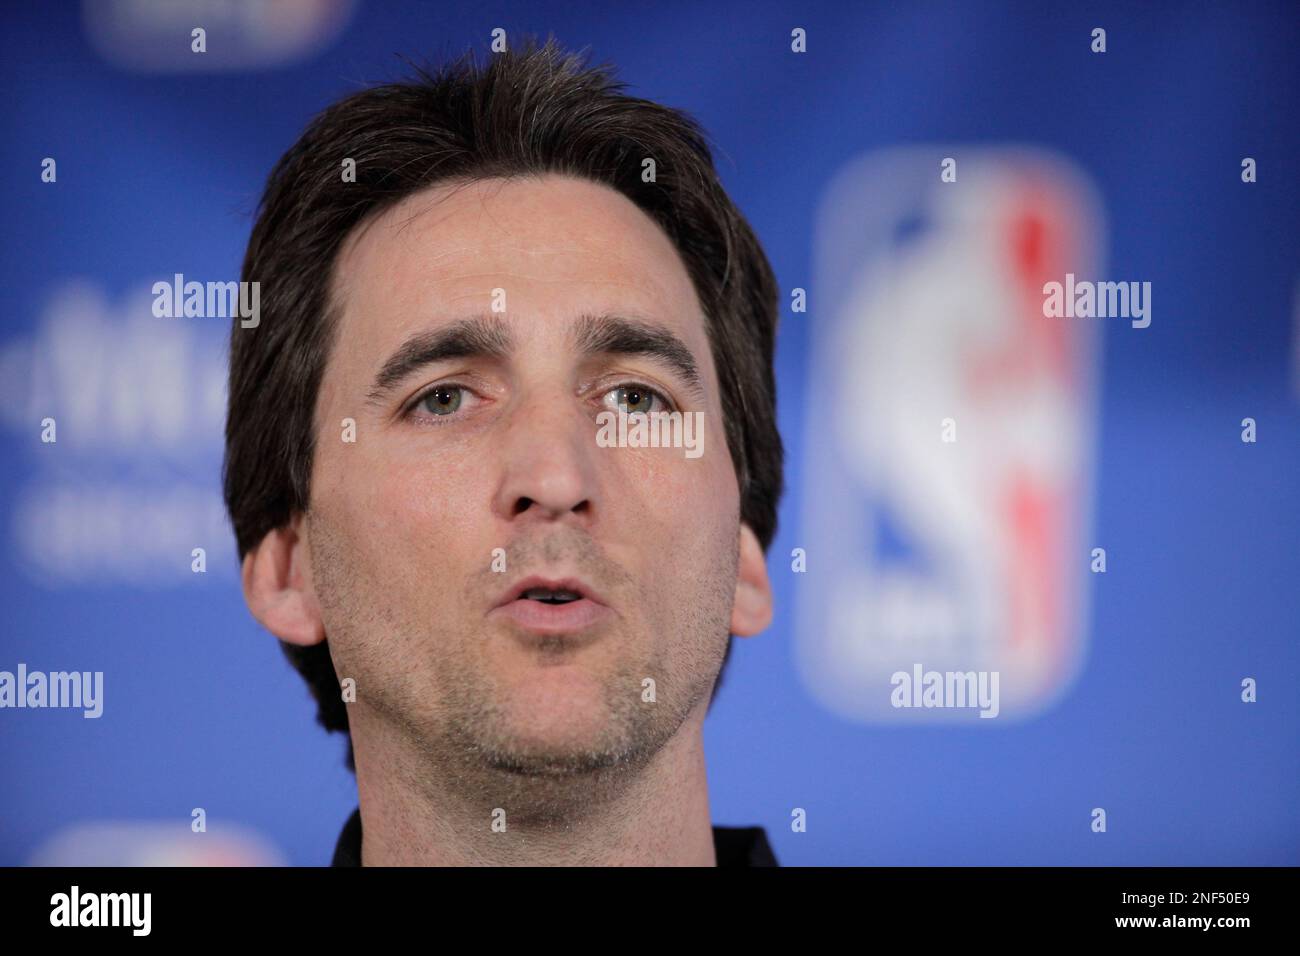 Chicago Bulls head coach Vinny Del Negro speaks during the NBA Rookie of  the Year ceremony, Wednesday, April 22, 2009, in Northbrook, Ill. (AP  Photo/M. Spencer Green Stock Photo - Alamy